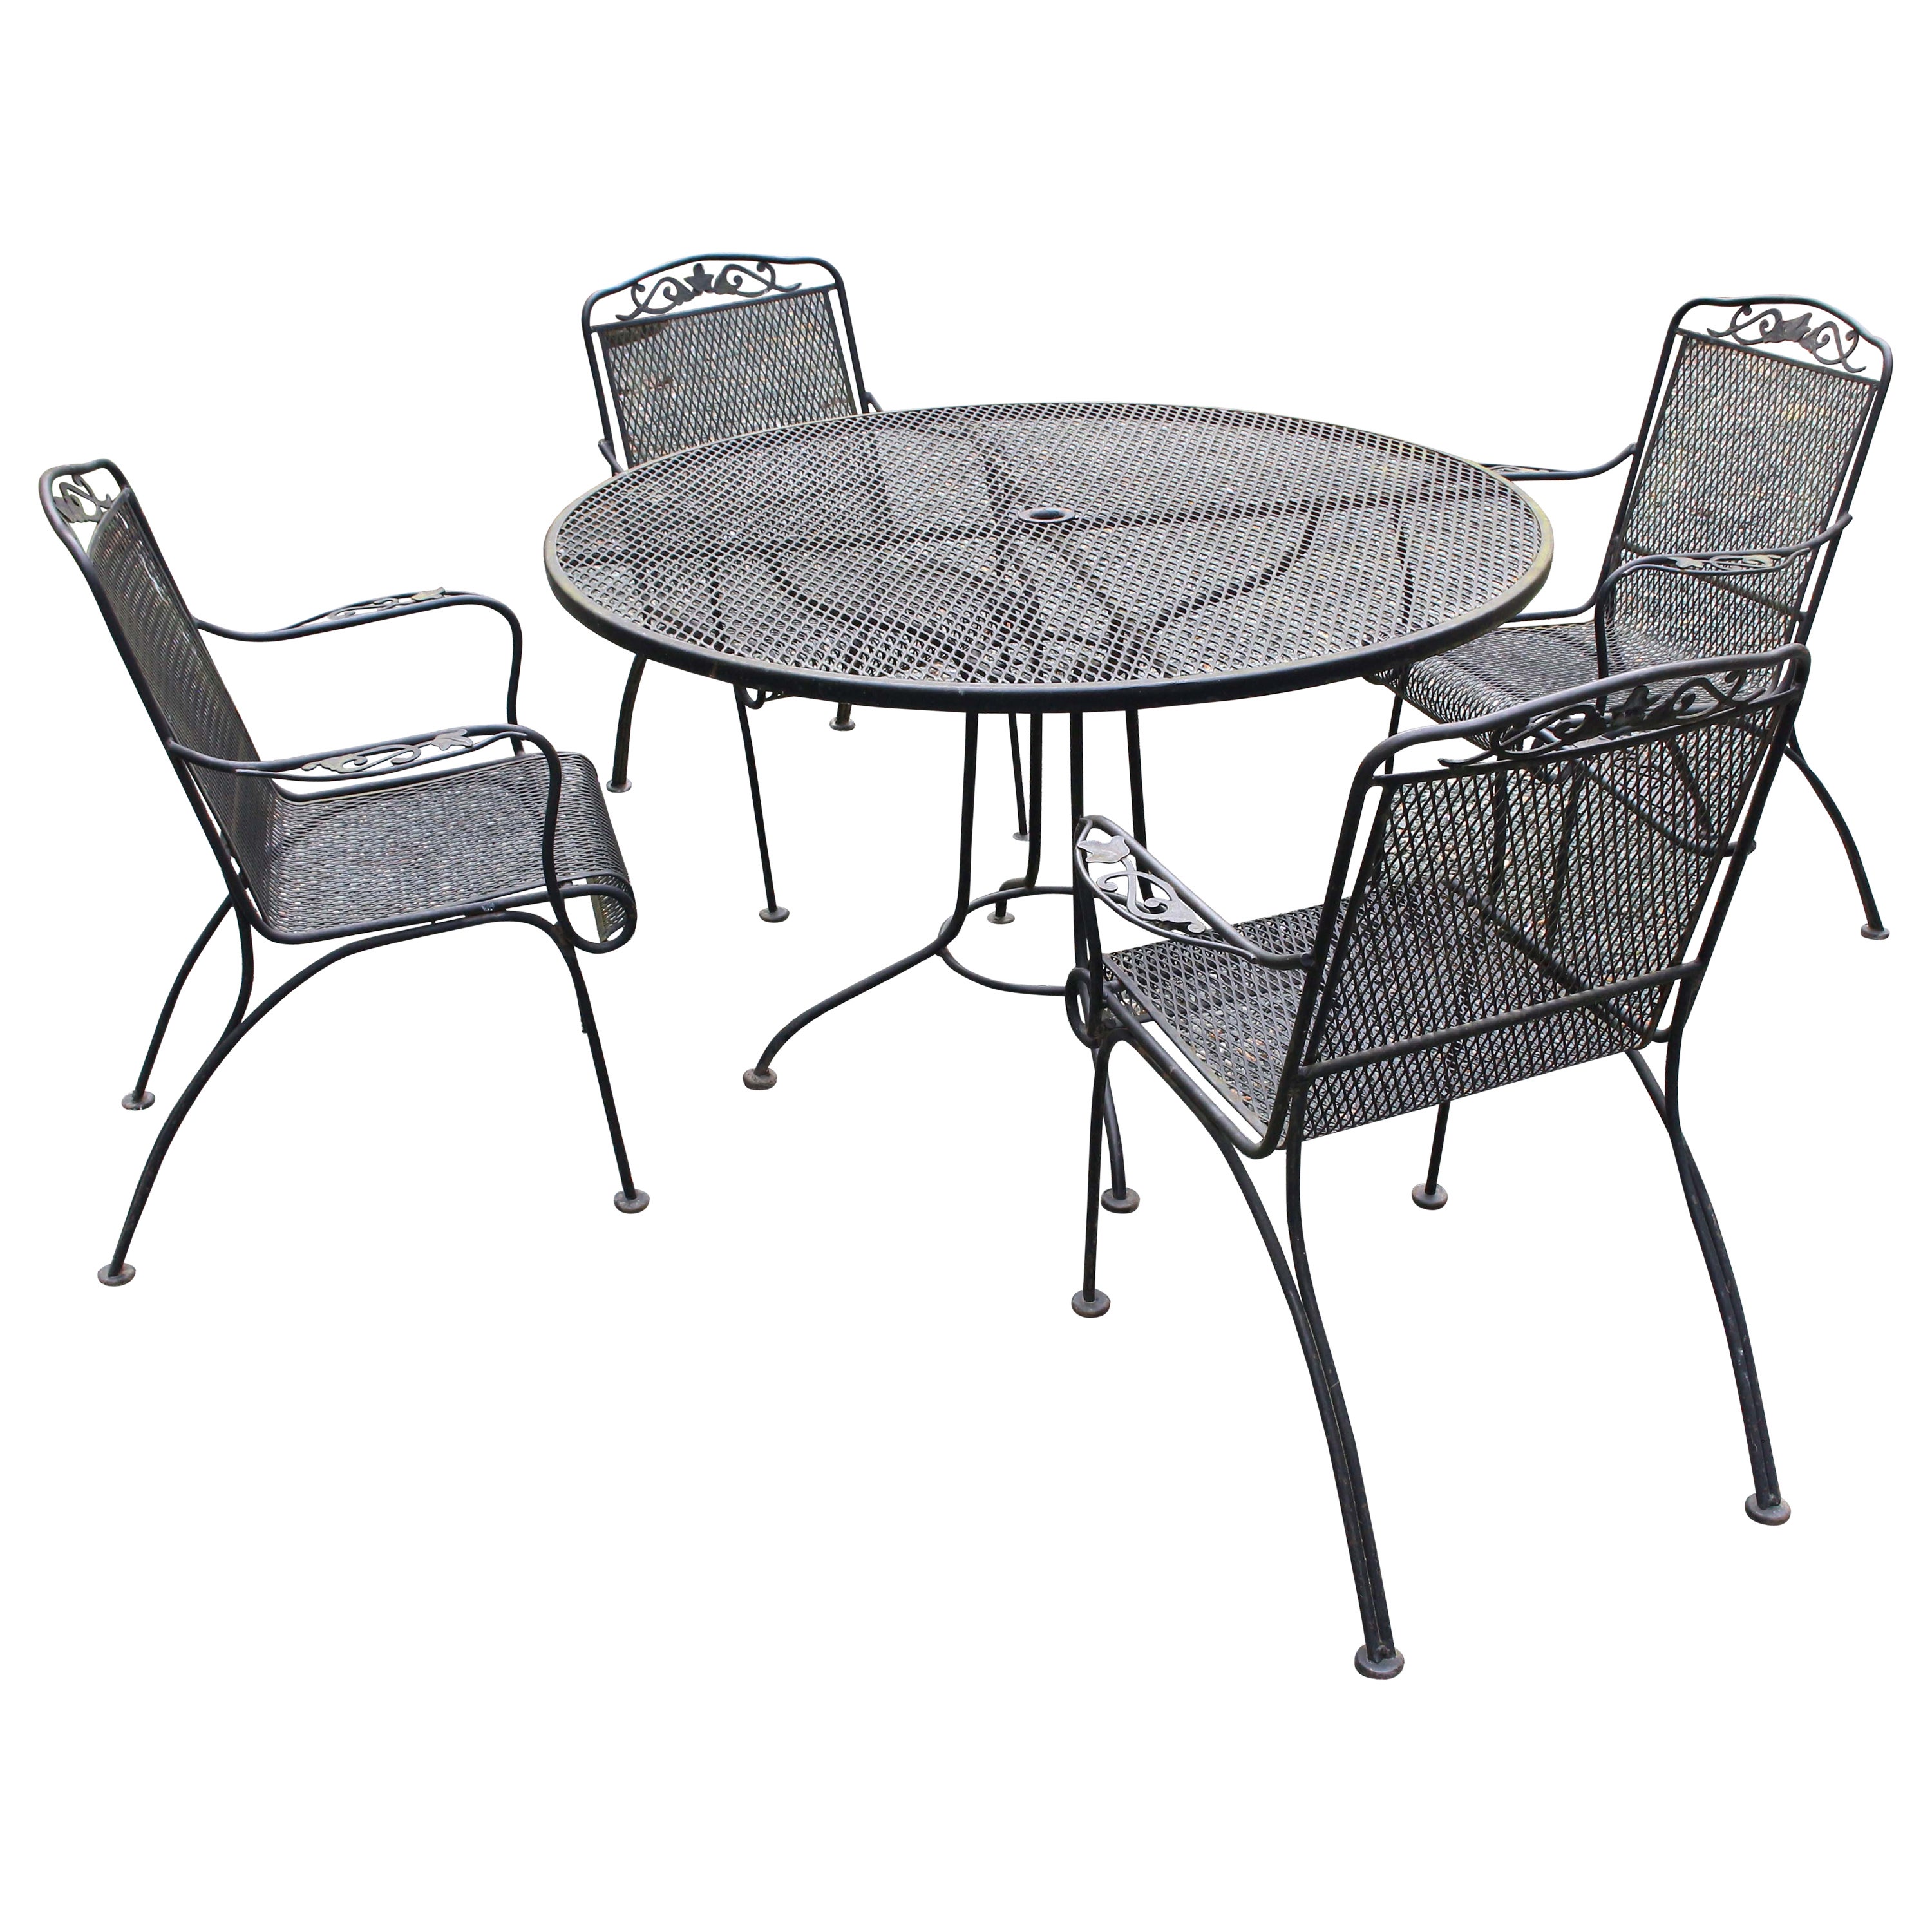 Mid-20th Century Woodard Wrought Iron Table & 4 Arm Chairs